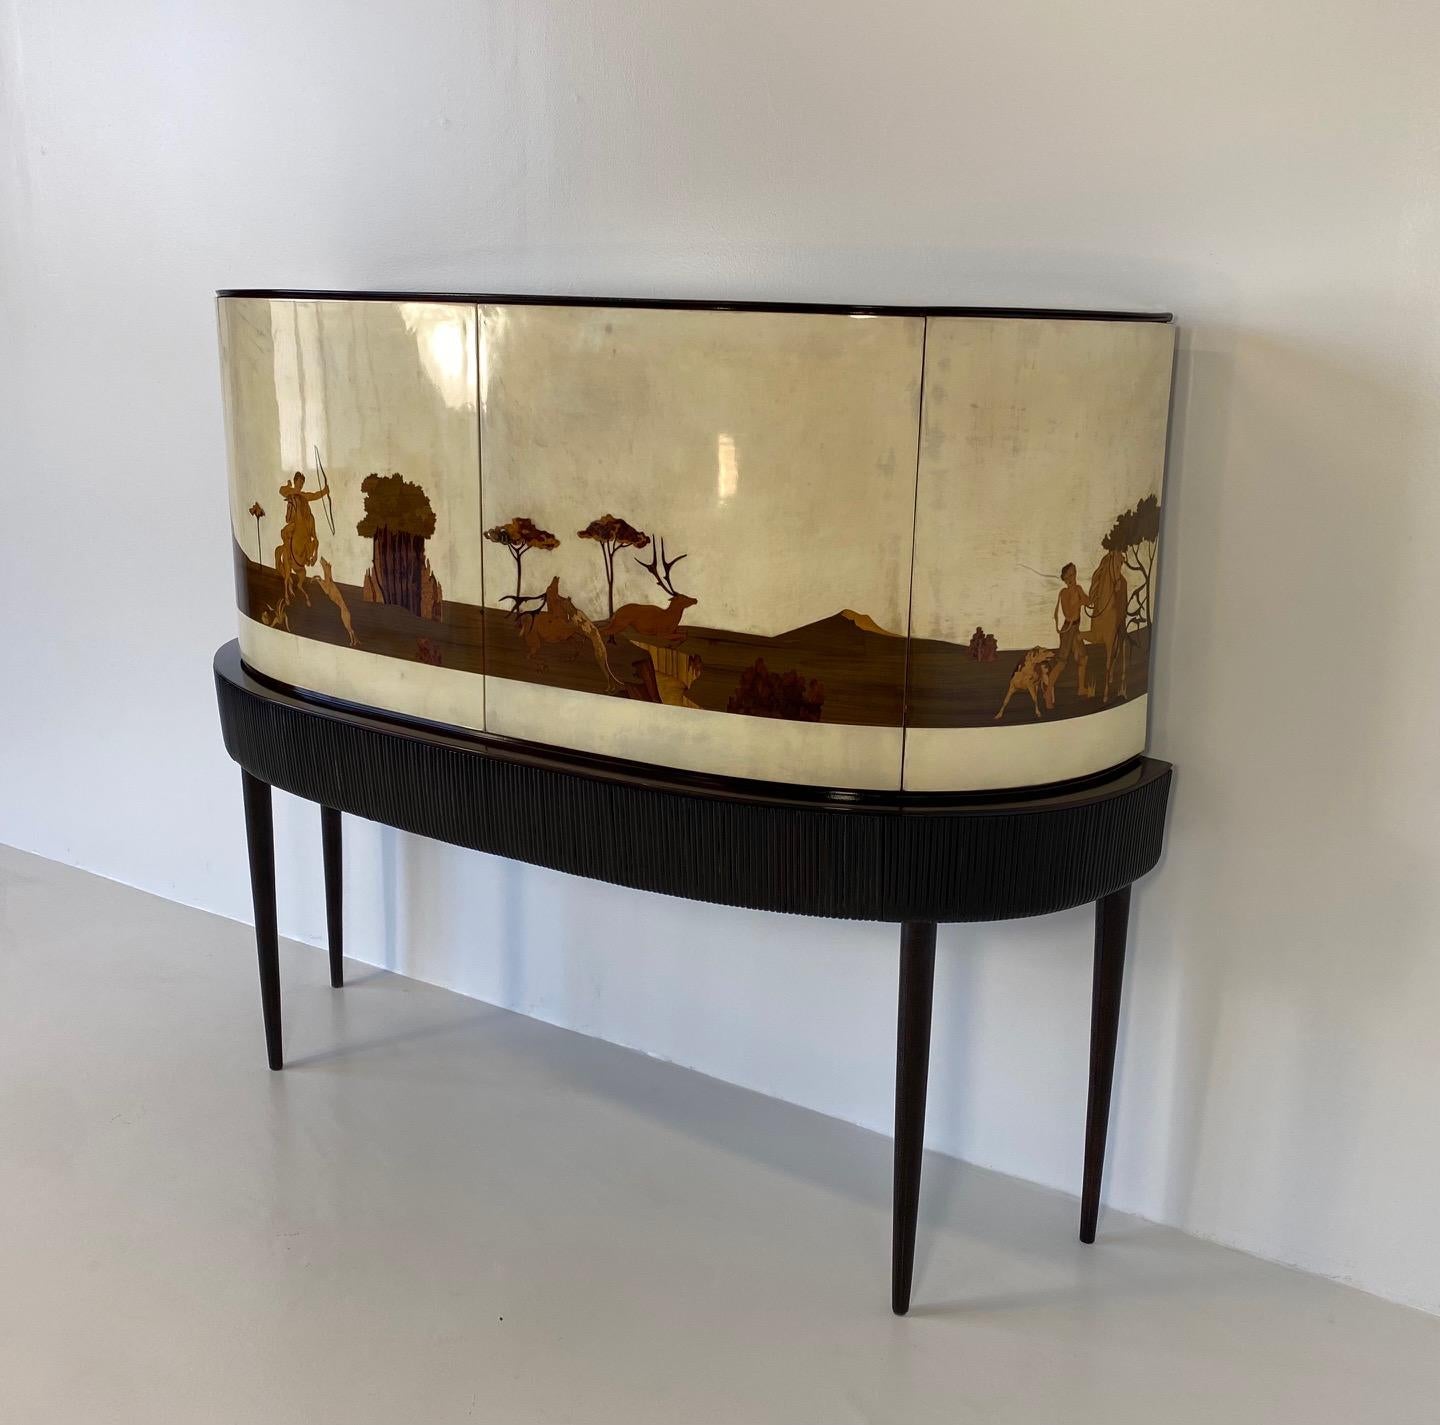 Parchment Paper Italian Art Deco Bar Cabinet in Parchment with Inlays Signed by Anzani, 1930s For Sale